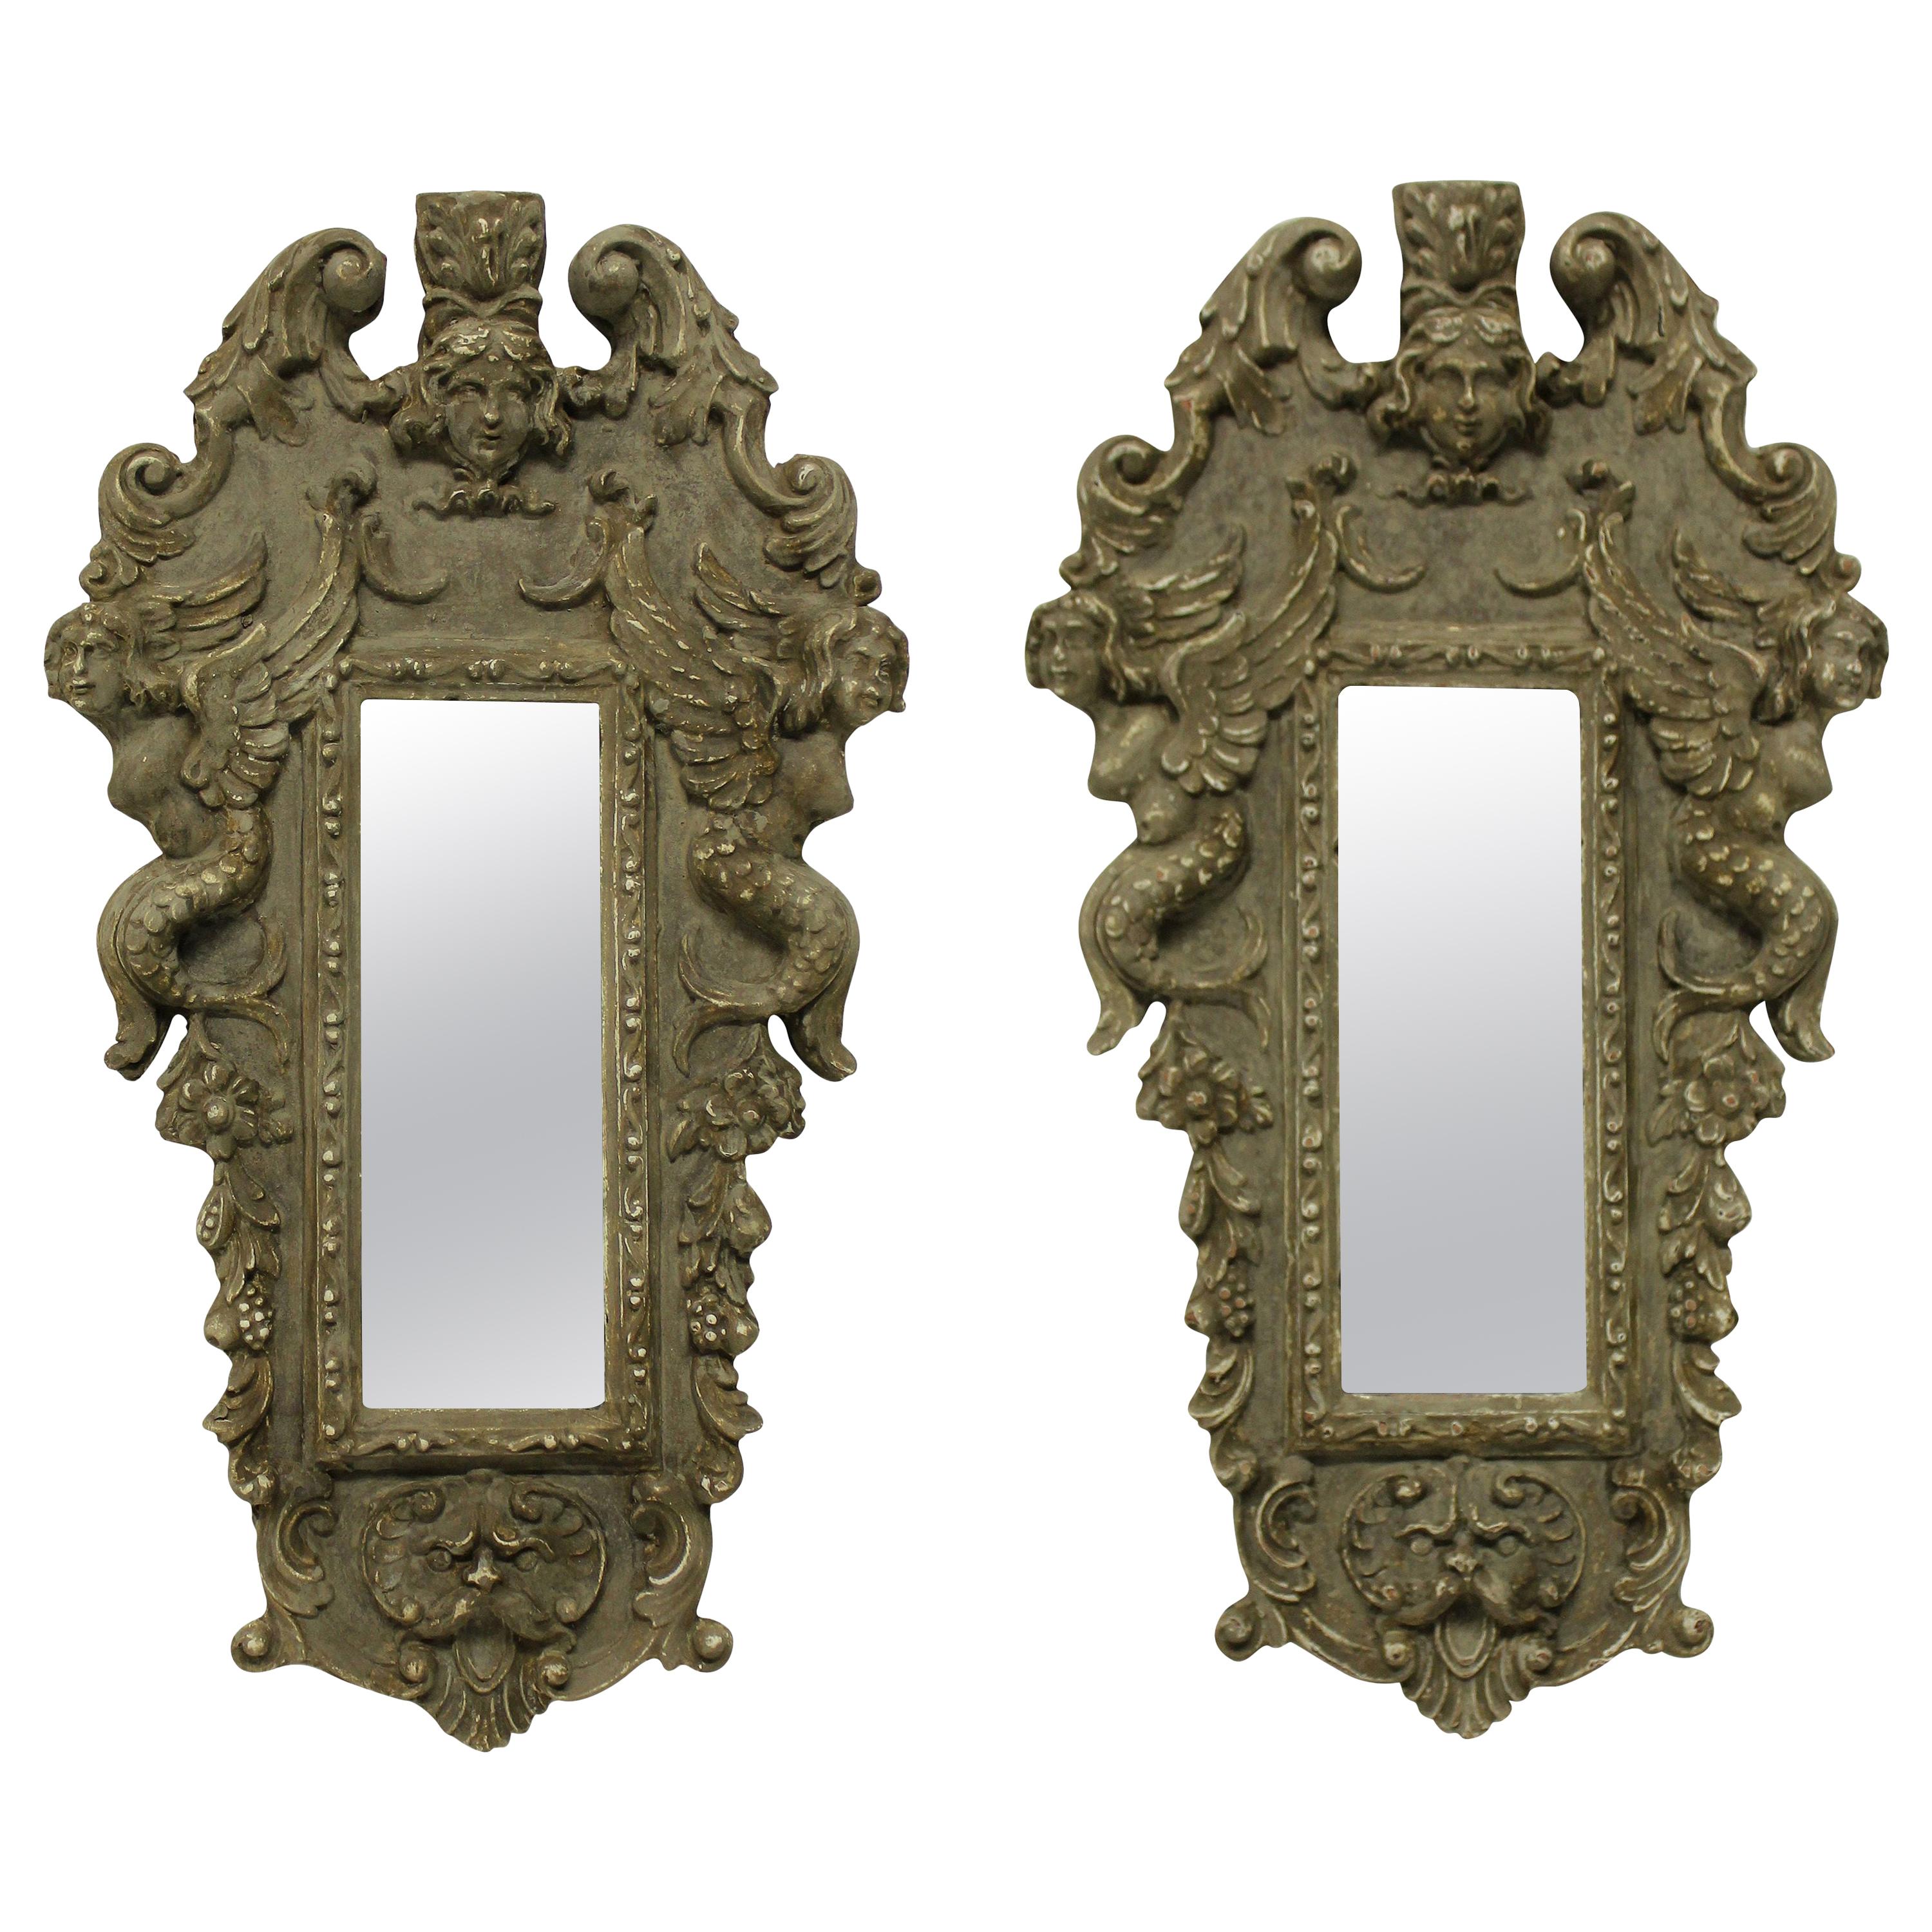 Pair of Small Carved and Painted Venetian Mirrors